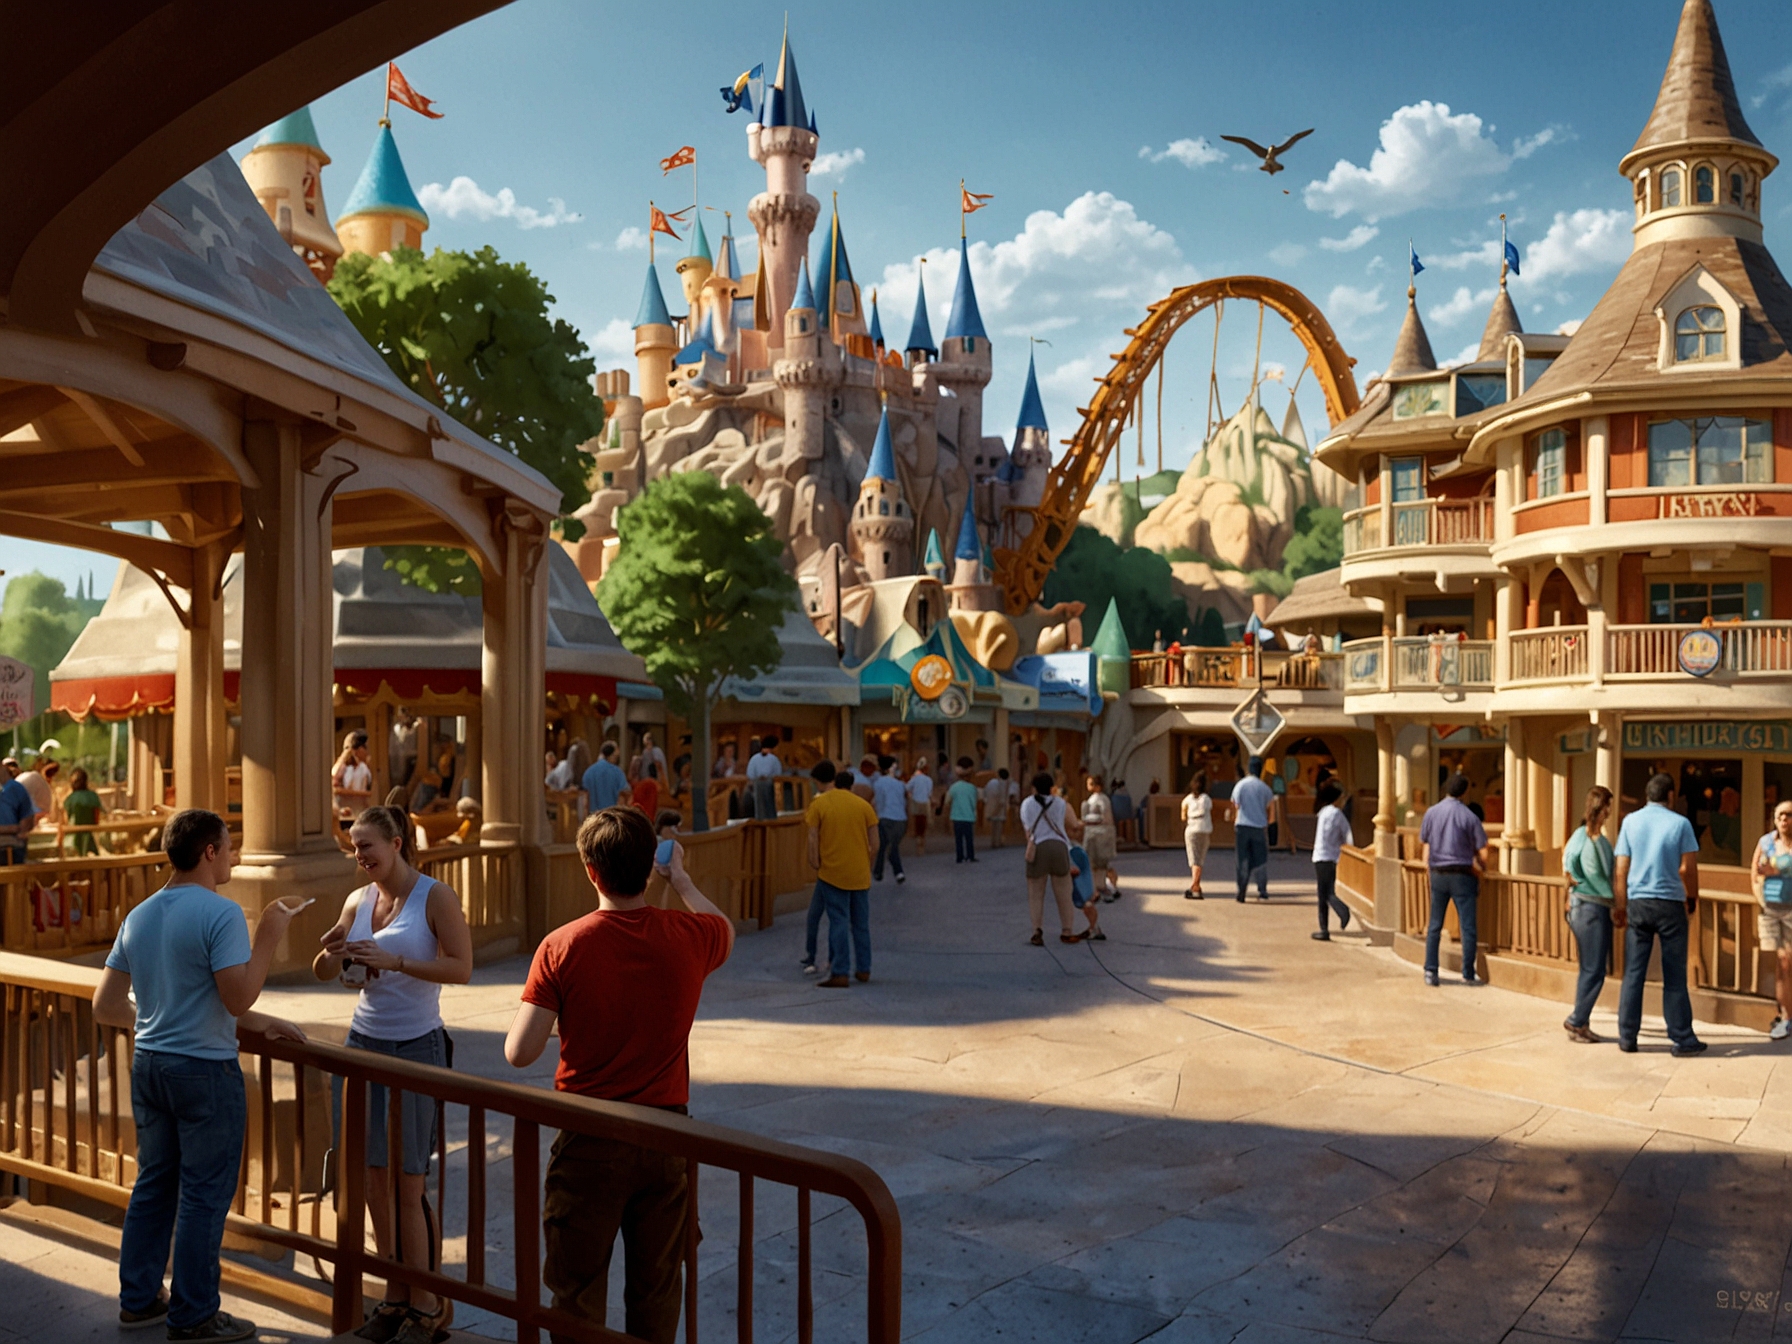 A view of Fantasyland expansion showing partially built new attractions and retail spaces, with construction workers busy and signs highlighting the future enhancements.